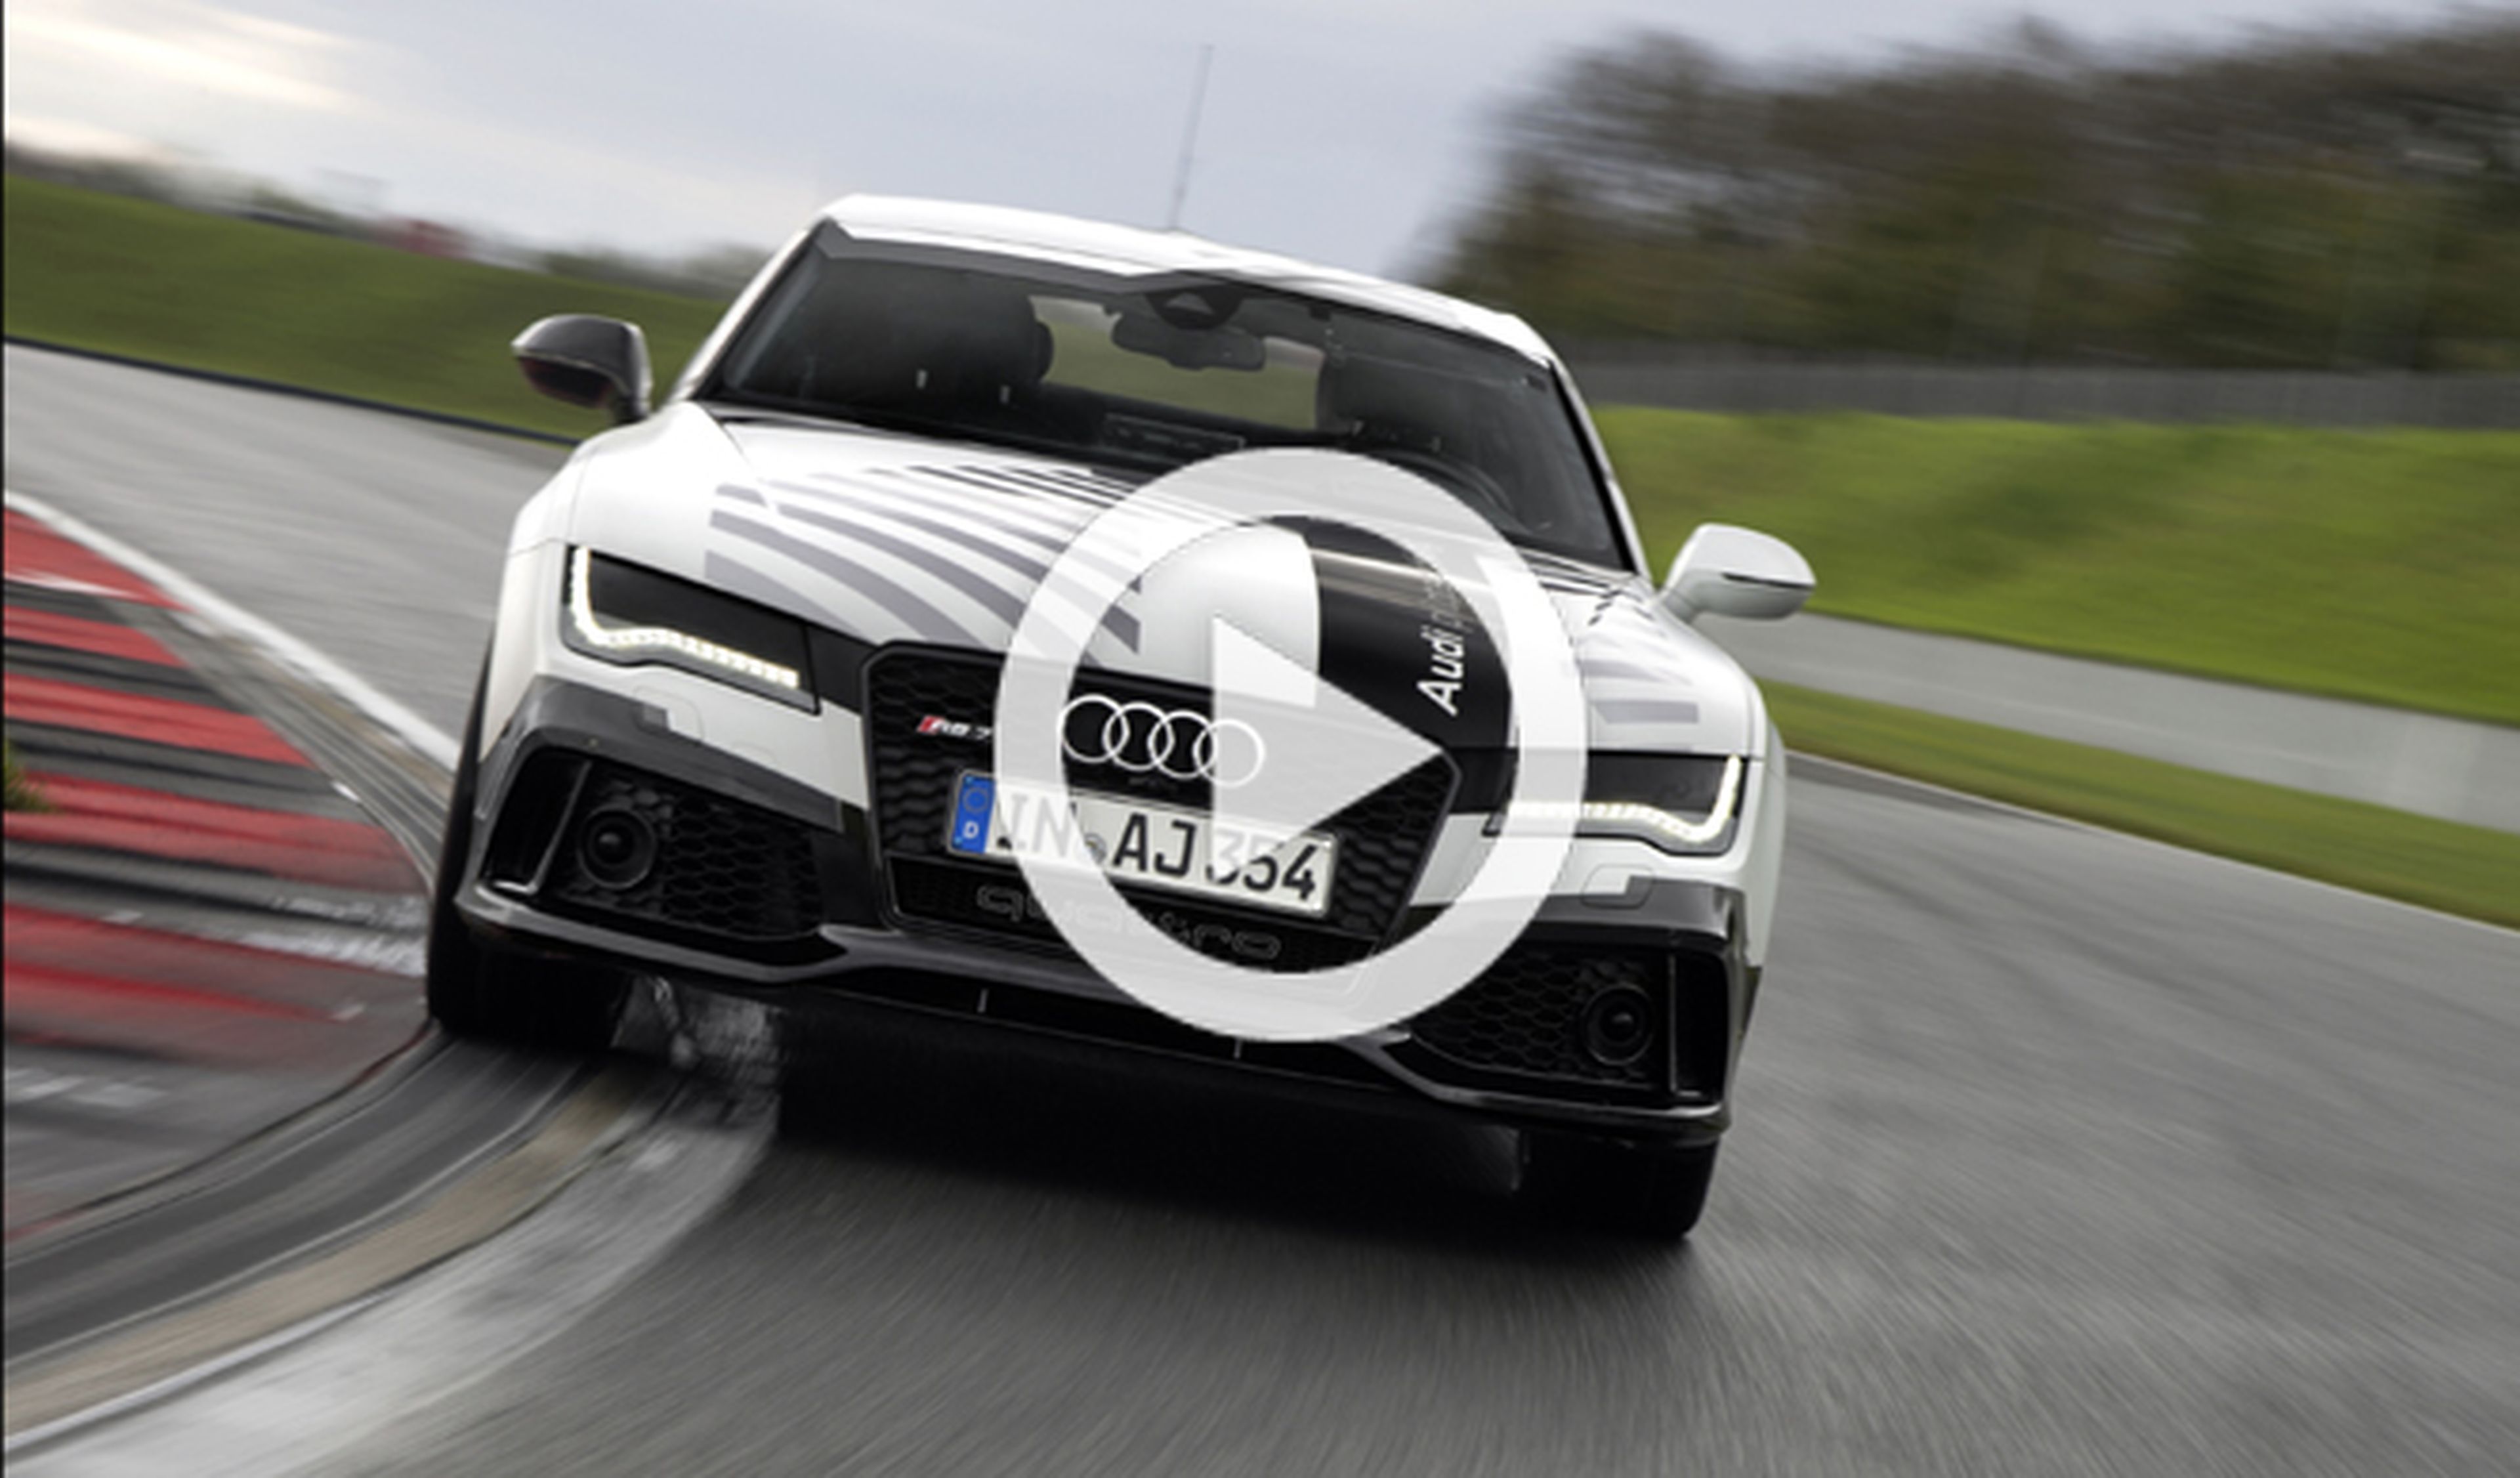 Audi RS7 Piloted Driving Concept: a fondo sin conductor